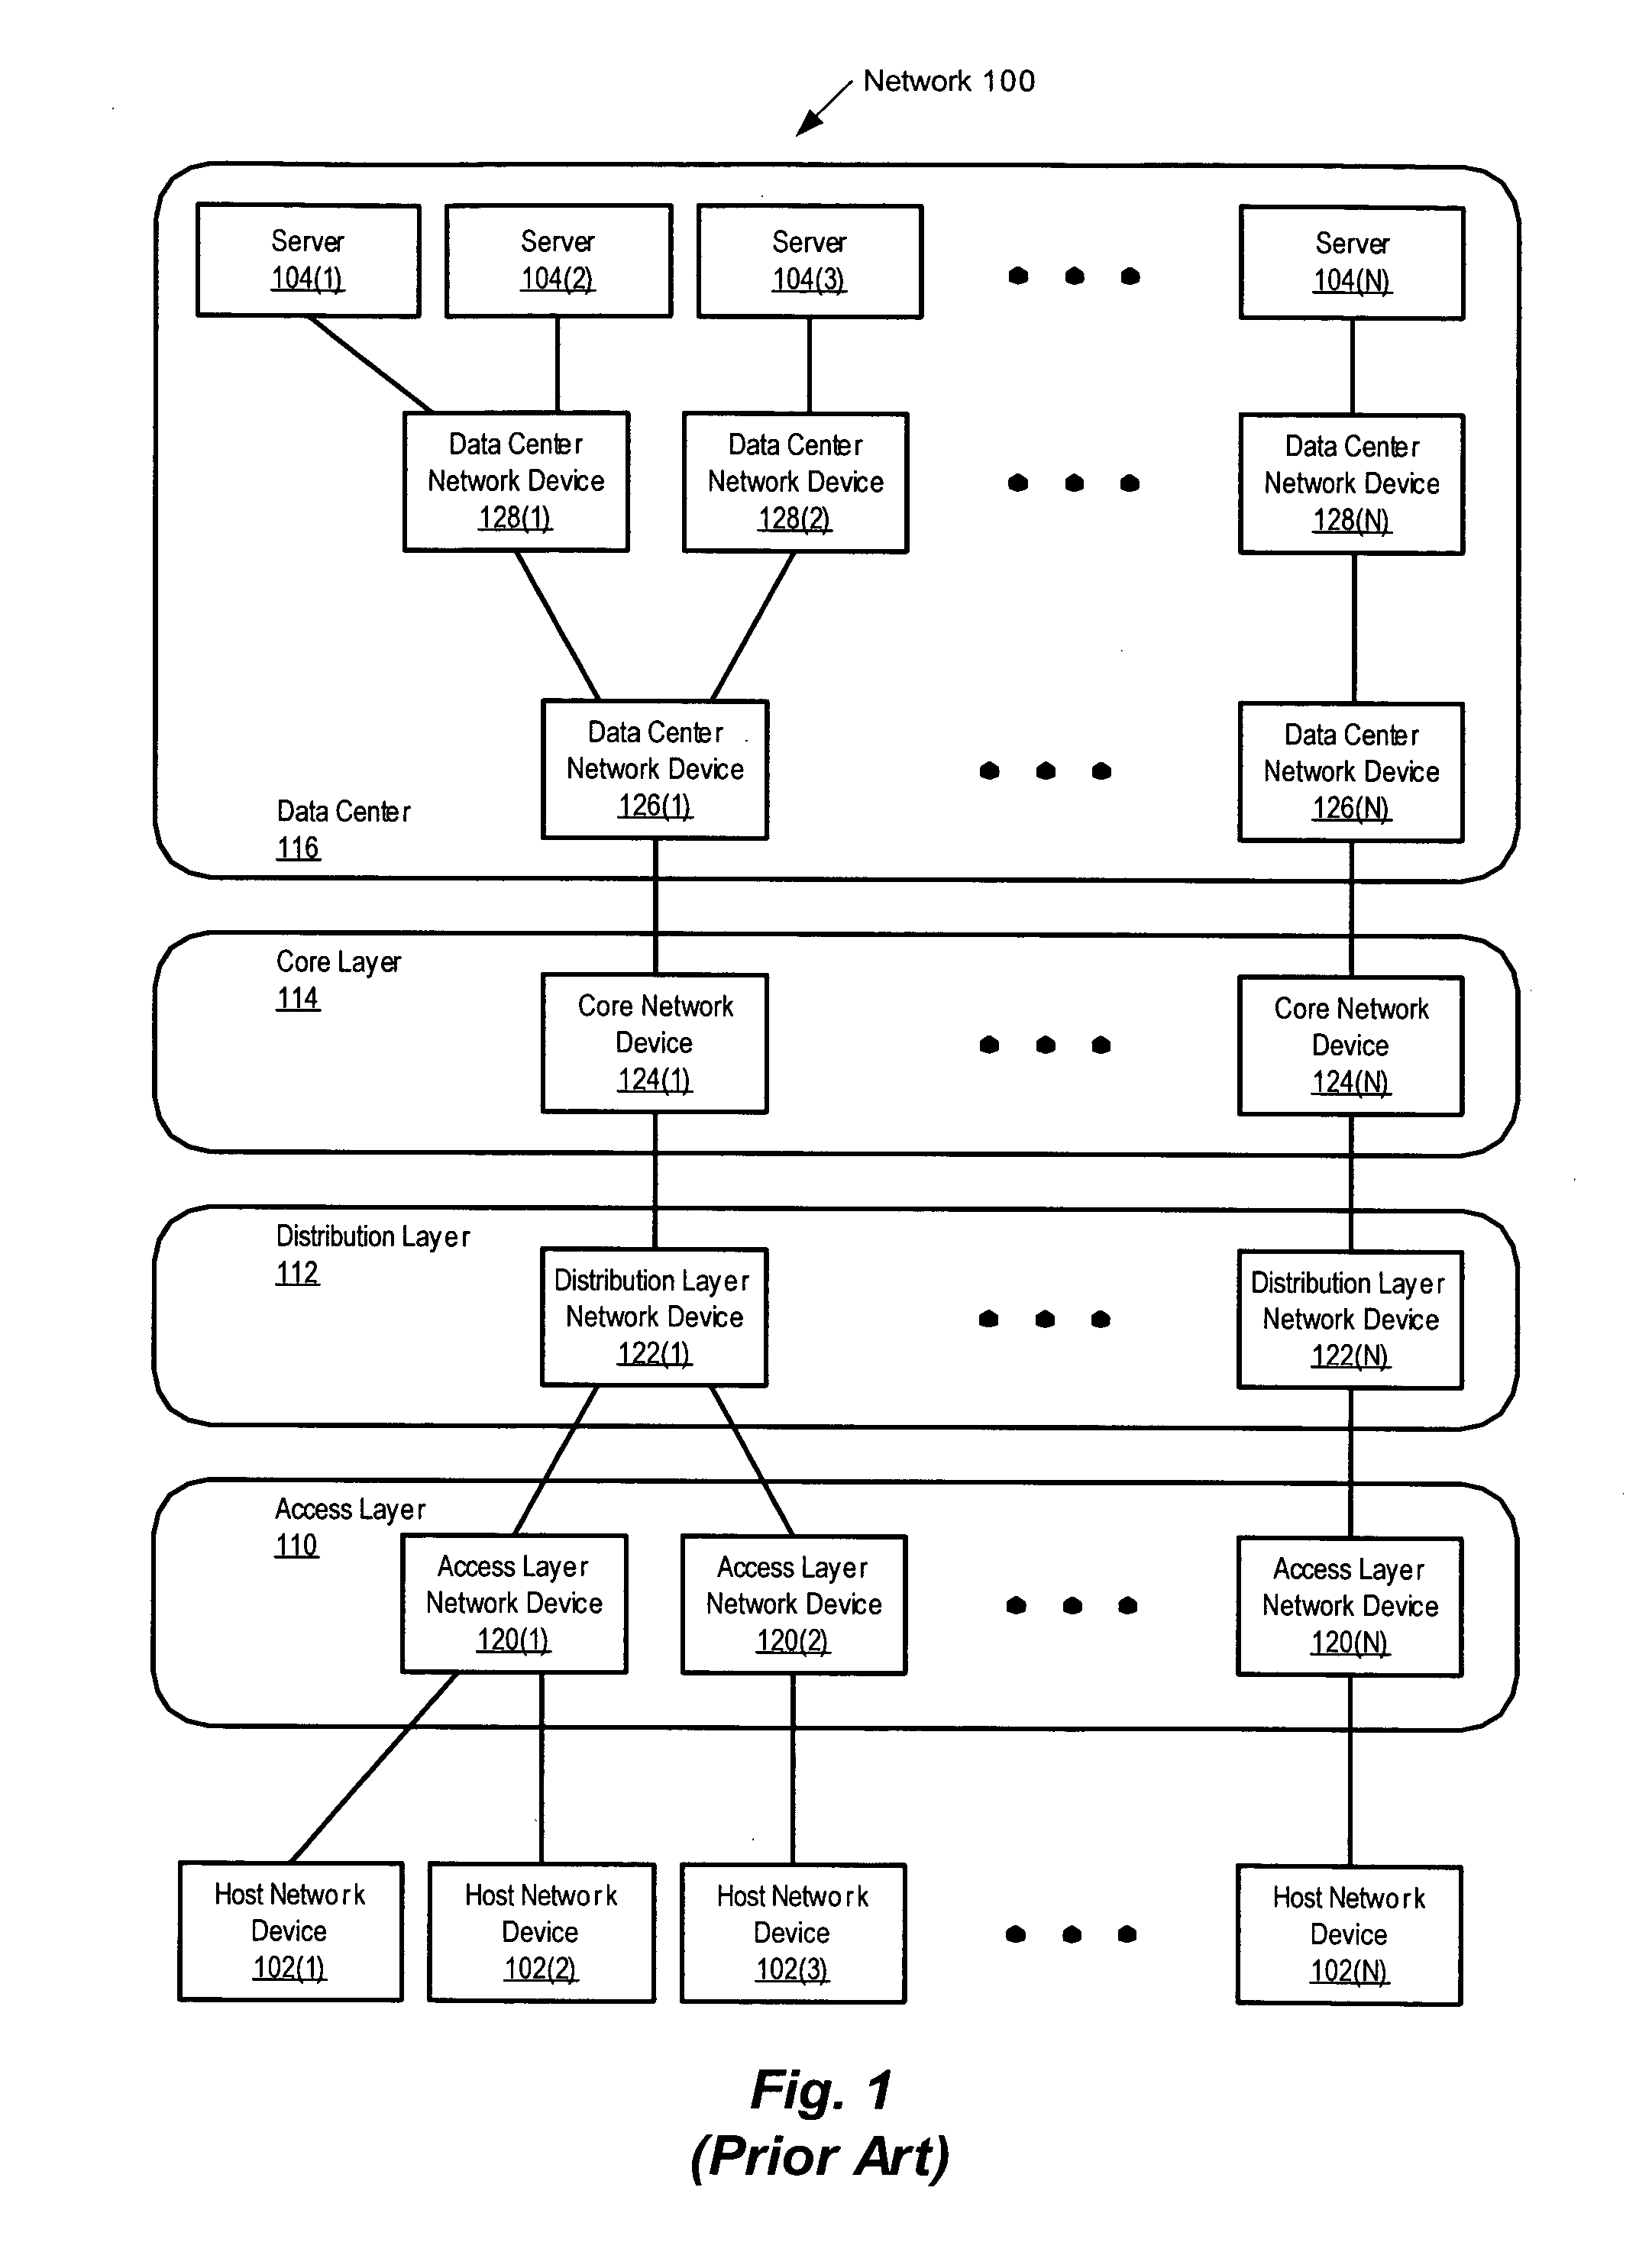 Network device architecture for centralized packet processing